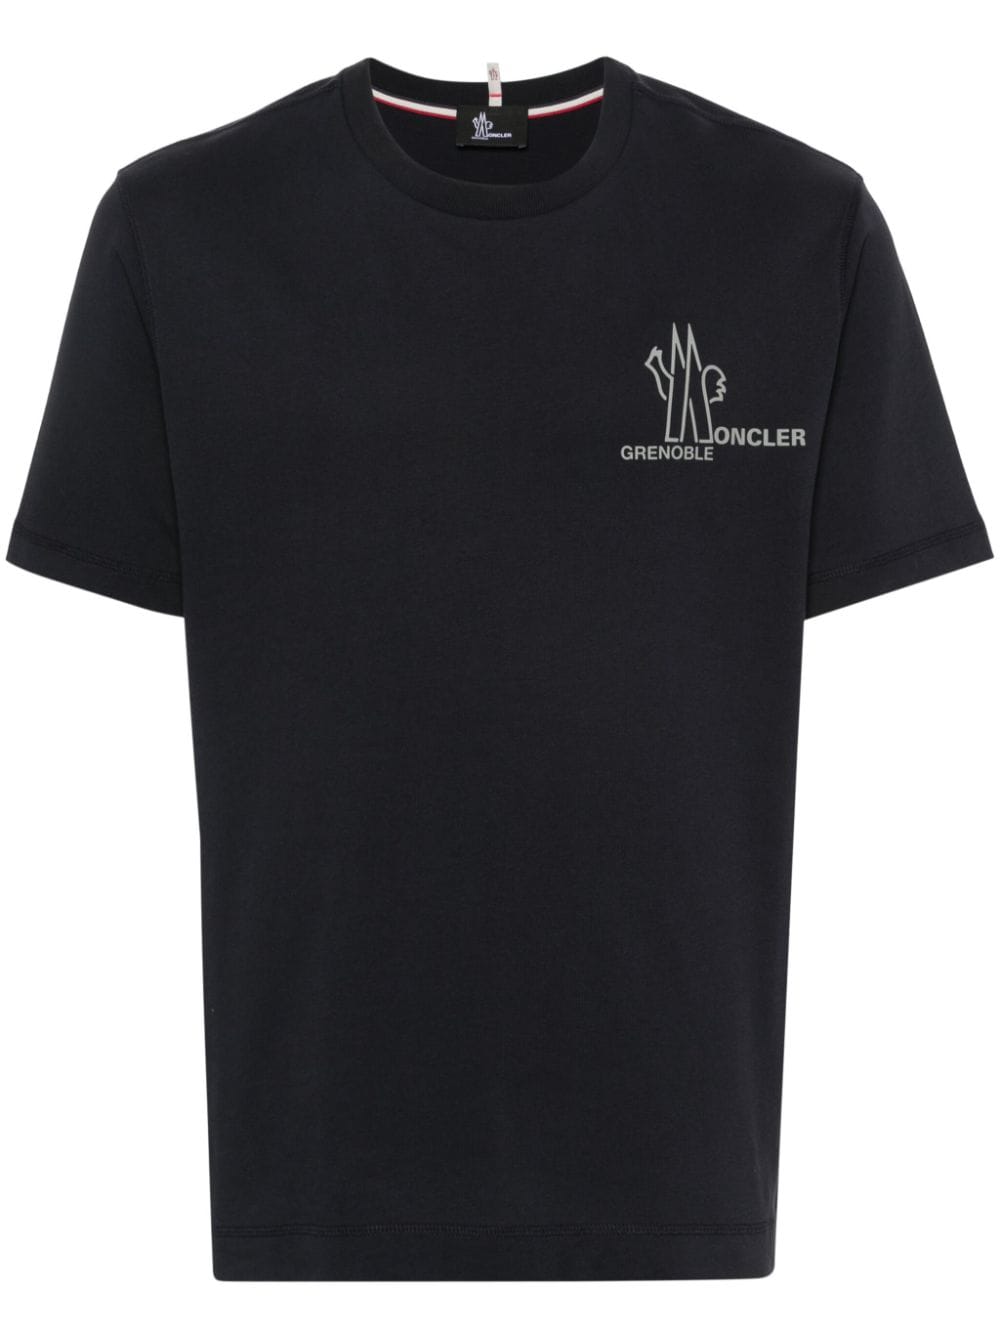 T-shirt con stampa logo<br><br><br>